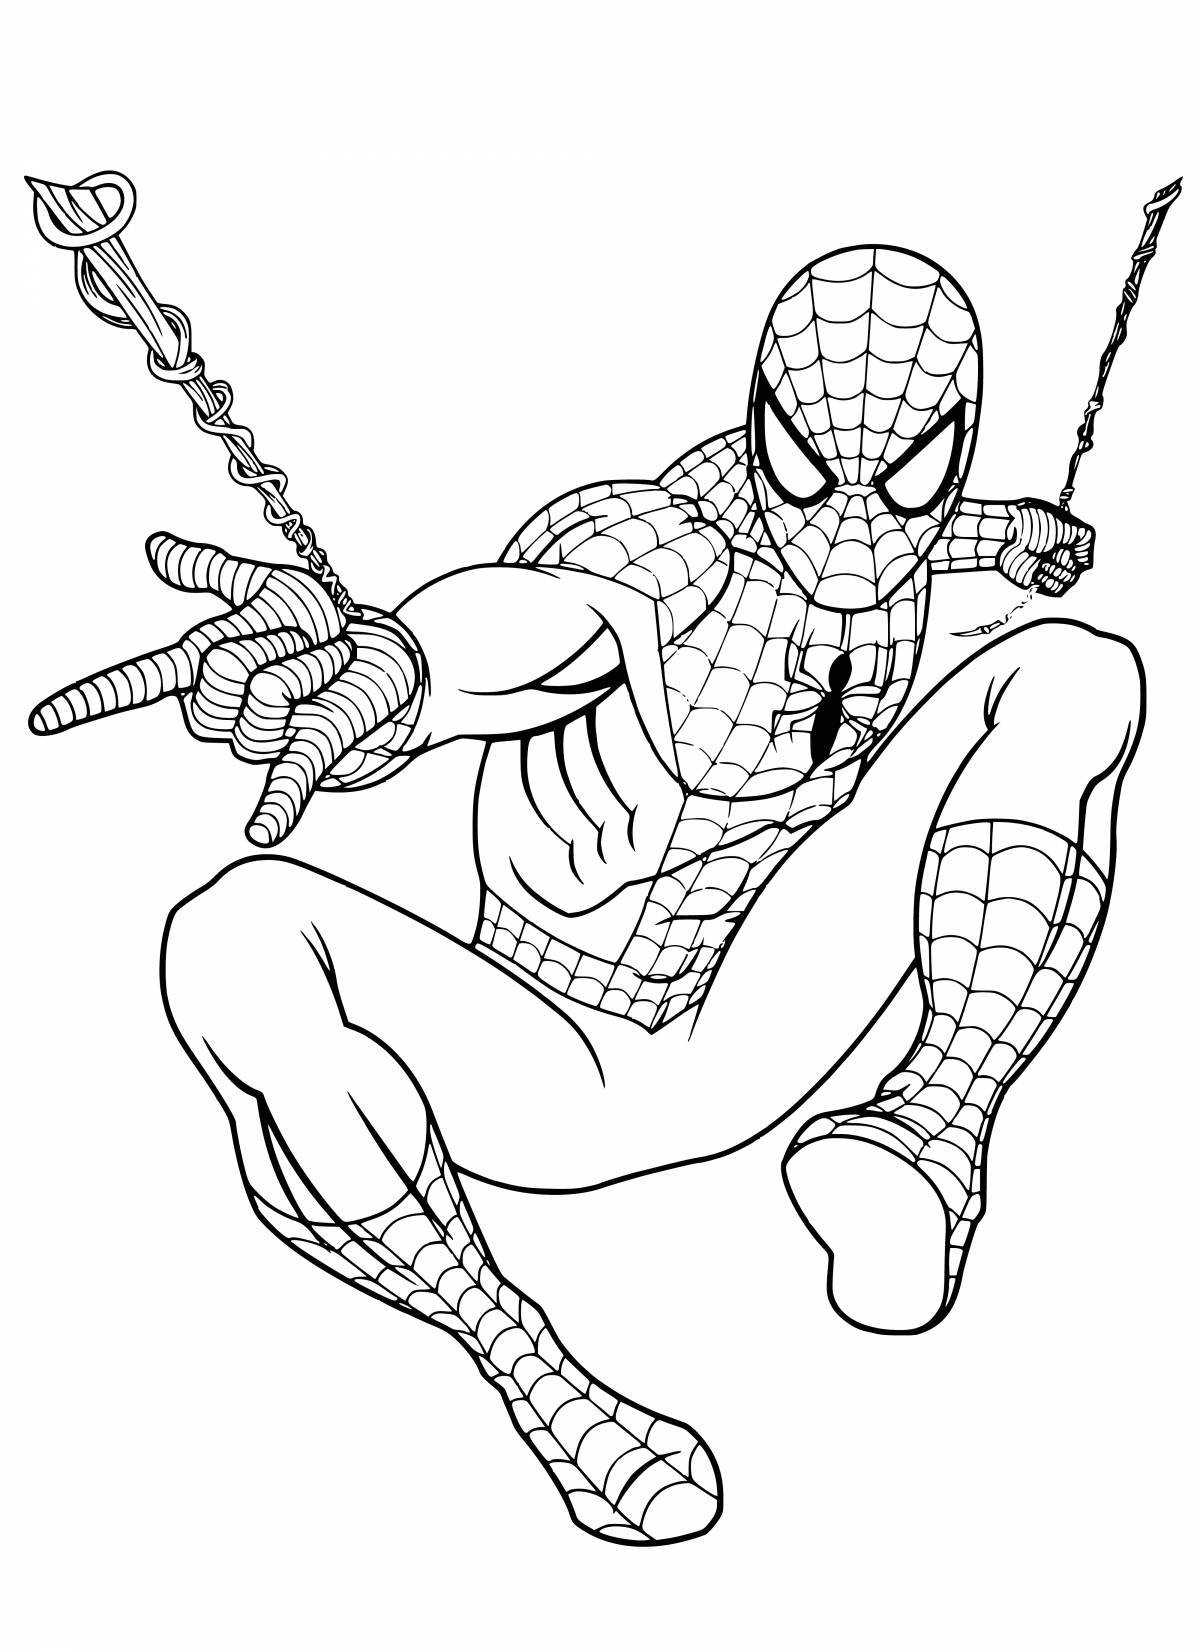 Spider man in good quality #2